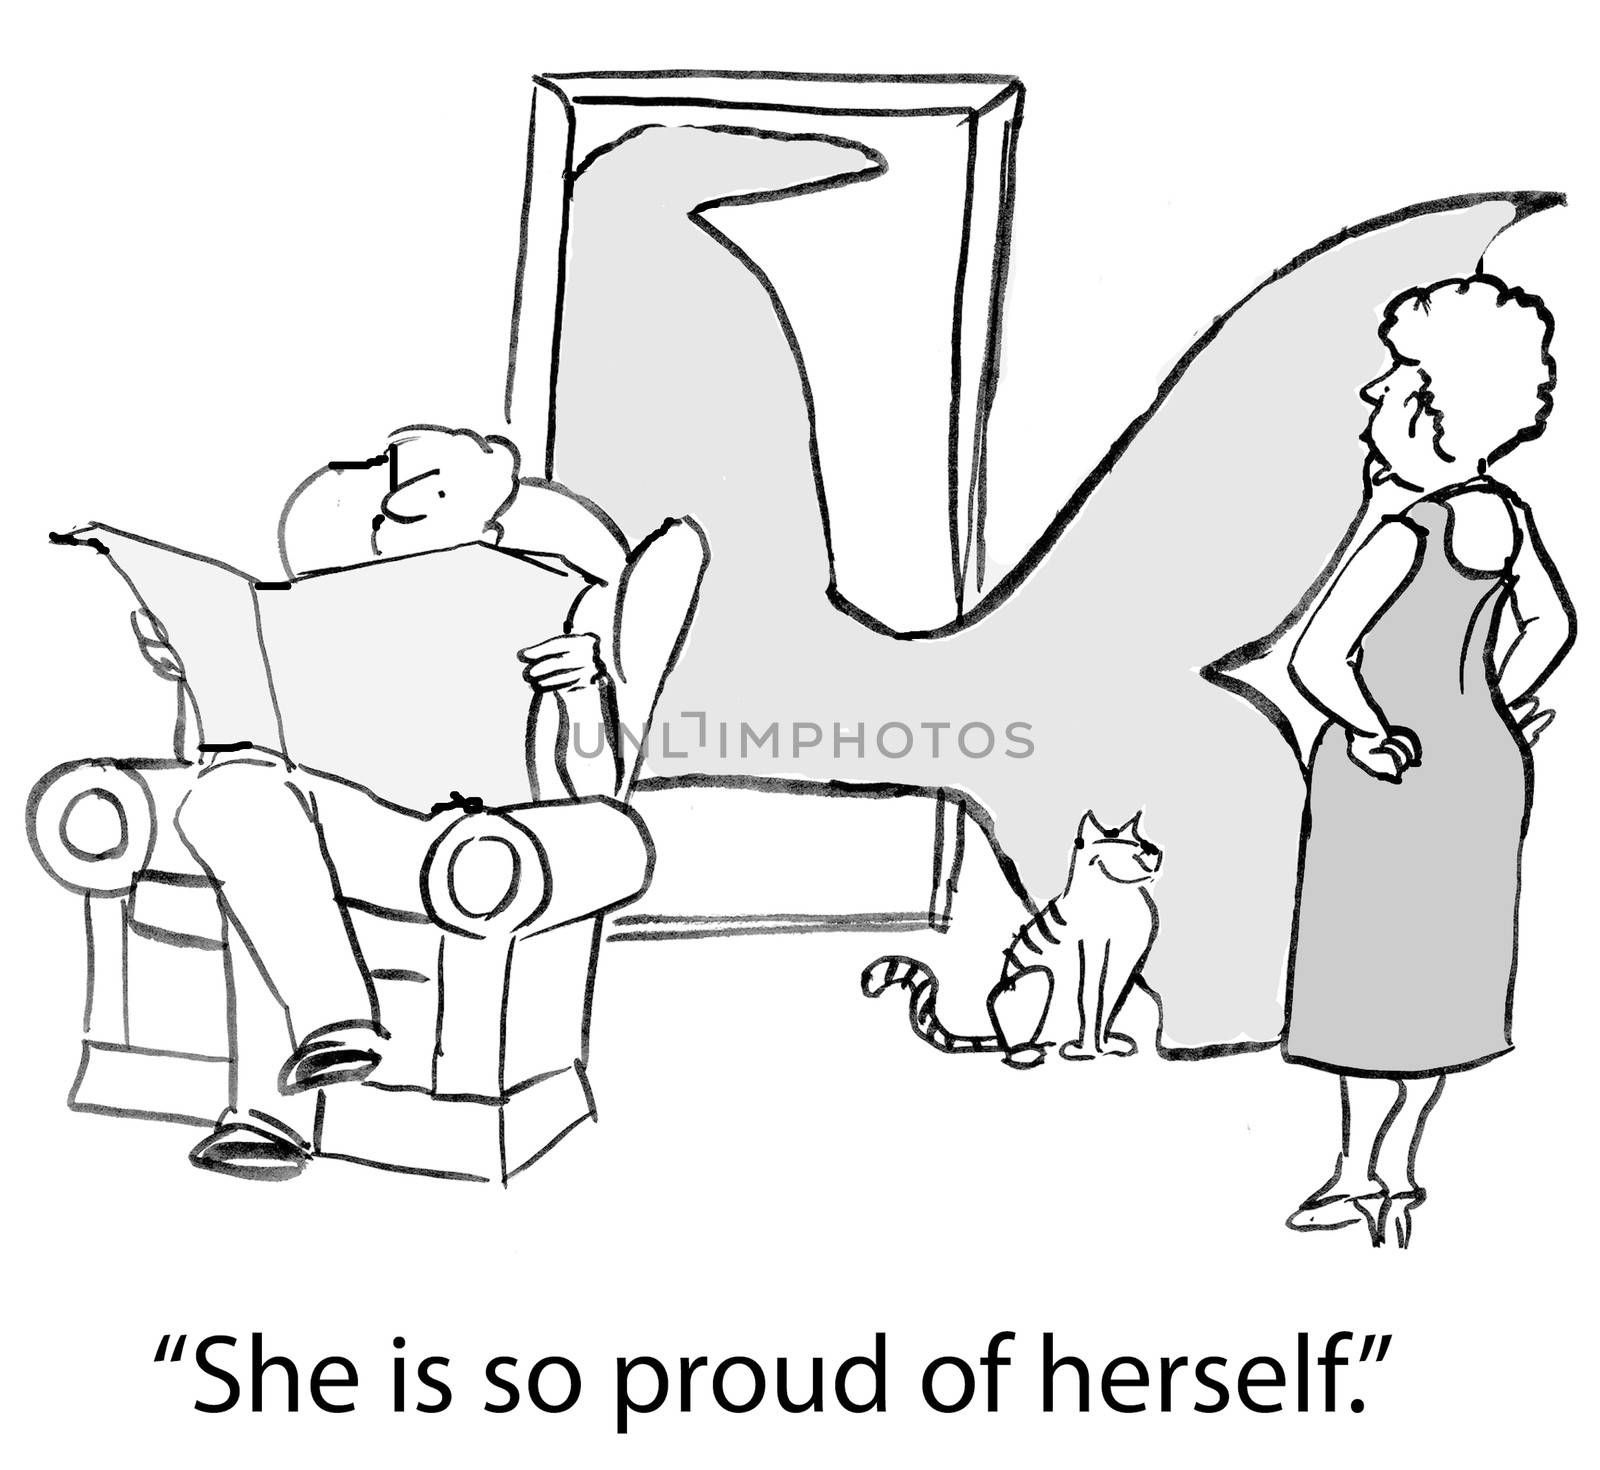 "She is just so proud of herself."